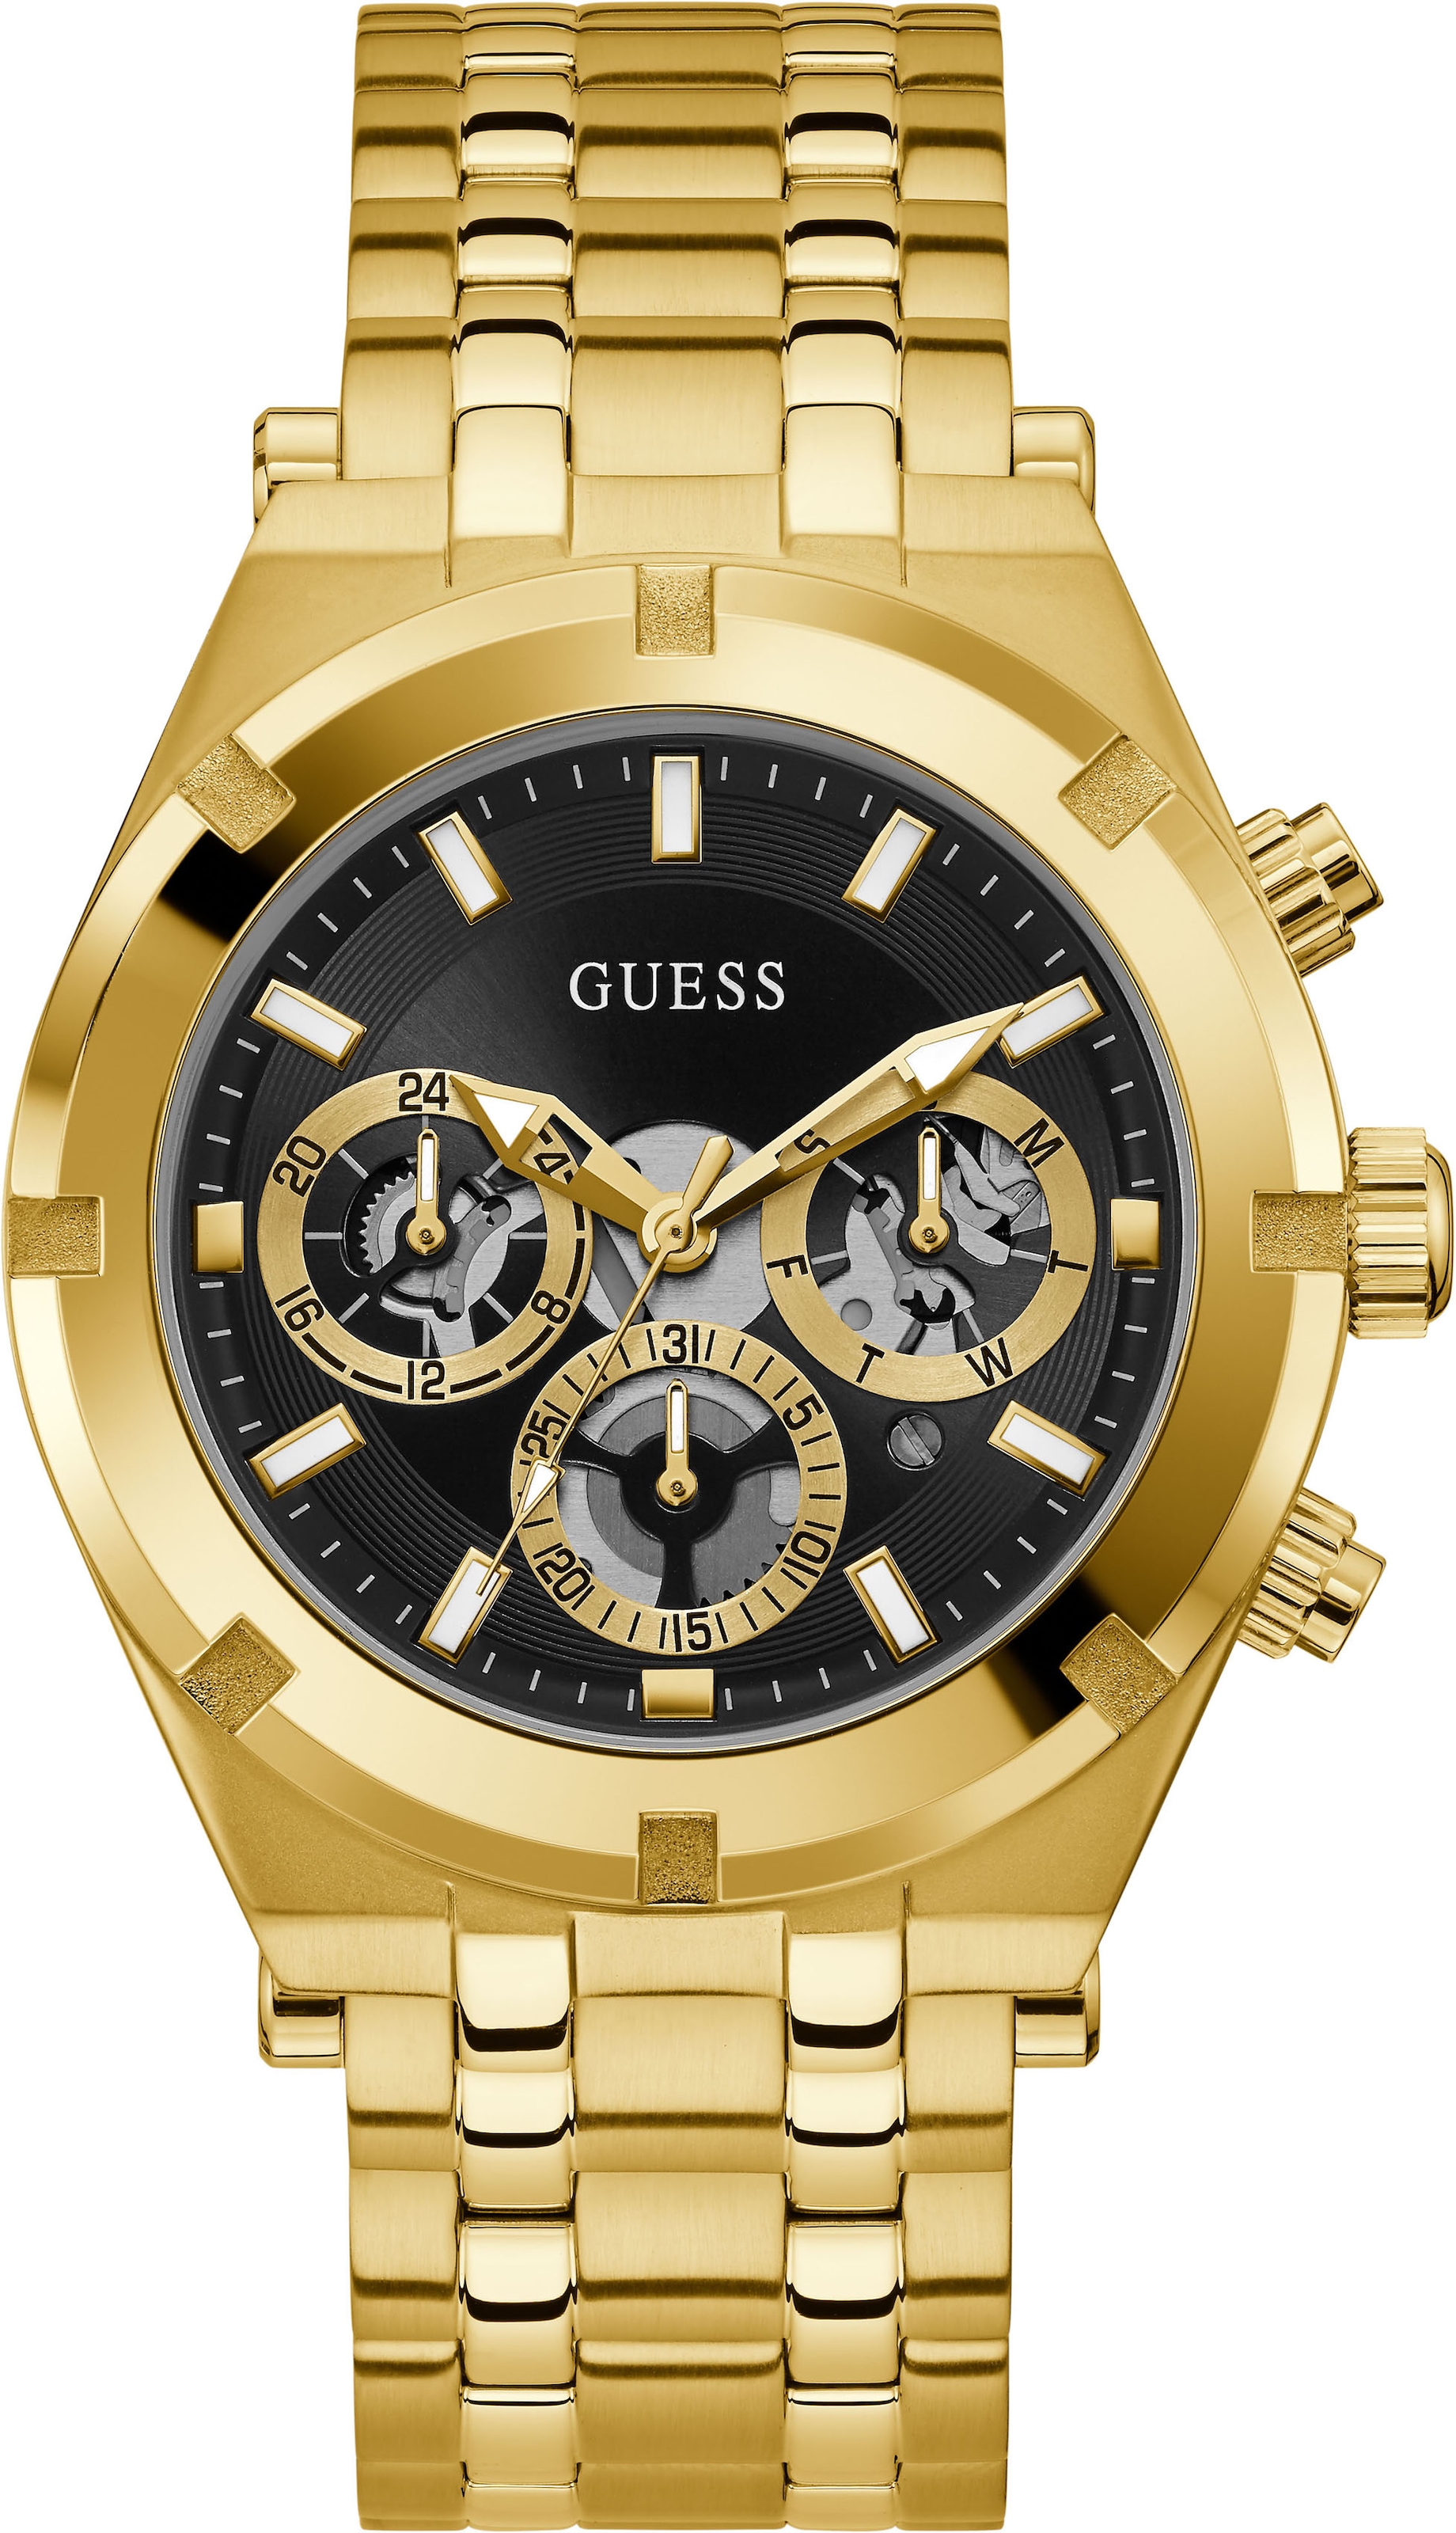 Multifunktionsuhr ♕ GW0260G2« bei »CONTINENTAL, Guess